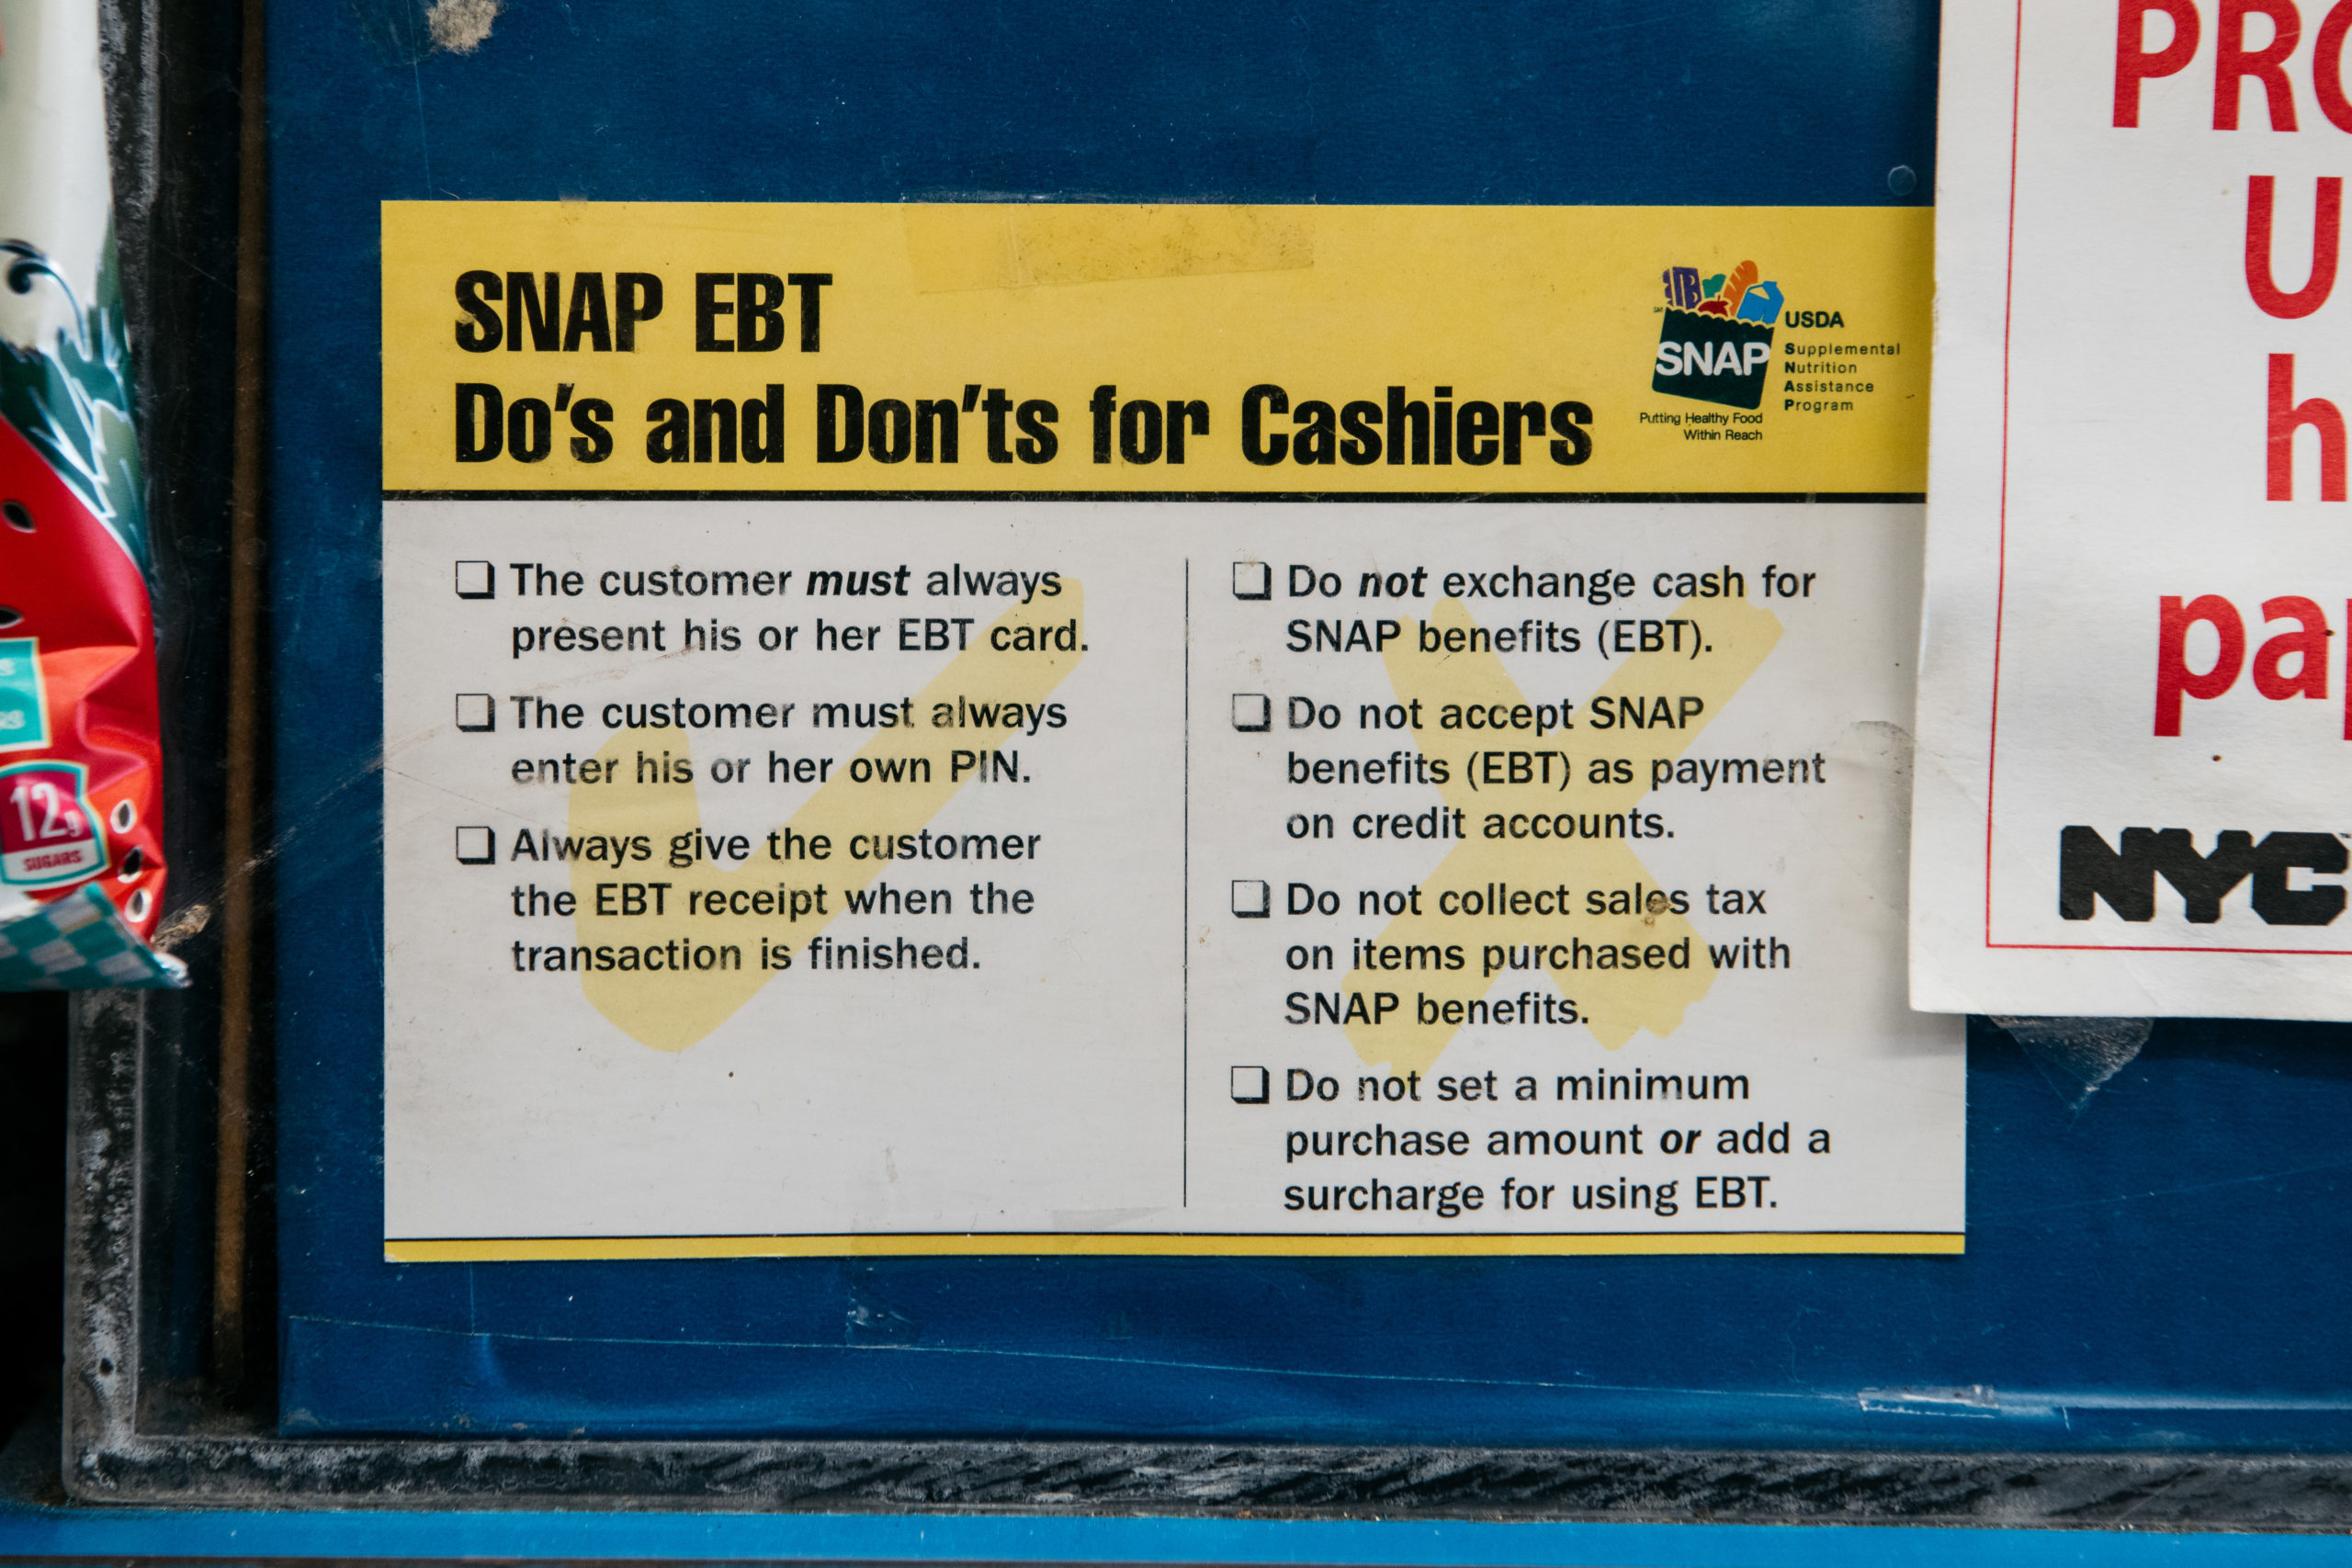 NEW YORK, NY - DECEMBER 05: A sign alerting customers about SNAP food stamps benefits is displayed in a Brooklyn grocery store on December 5, 2019 in New York City. Earlier this week the Trump Administration announced stricter requirements for food stamps benefits that would cut support for nearly 700,000 poor Americans. (Photo by Scott Heins/Getty Images)